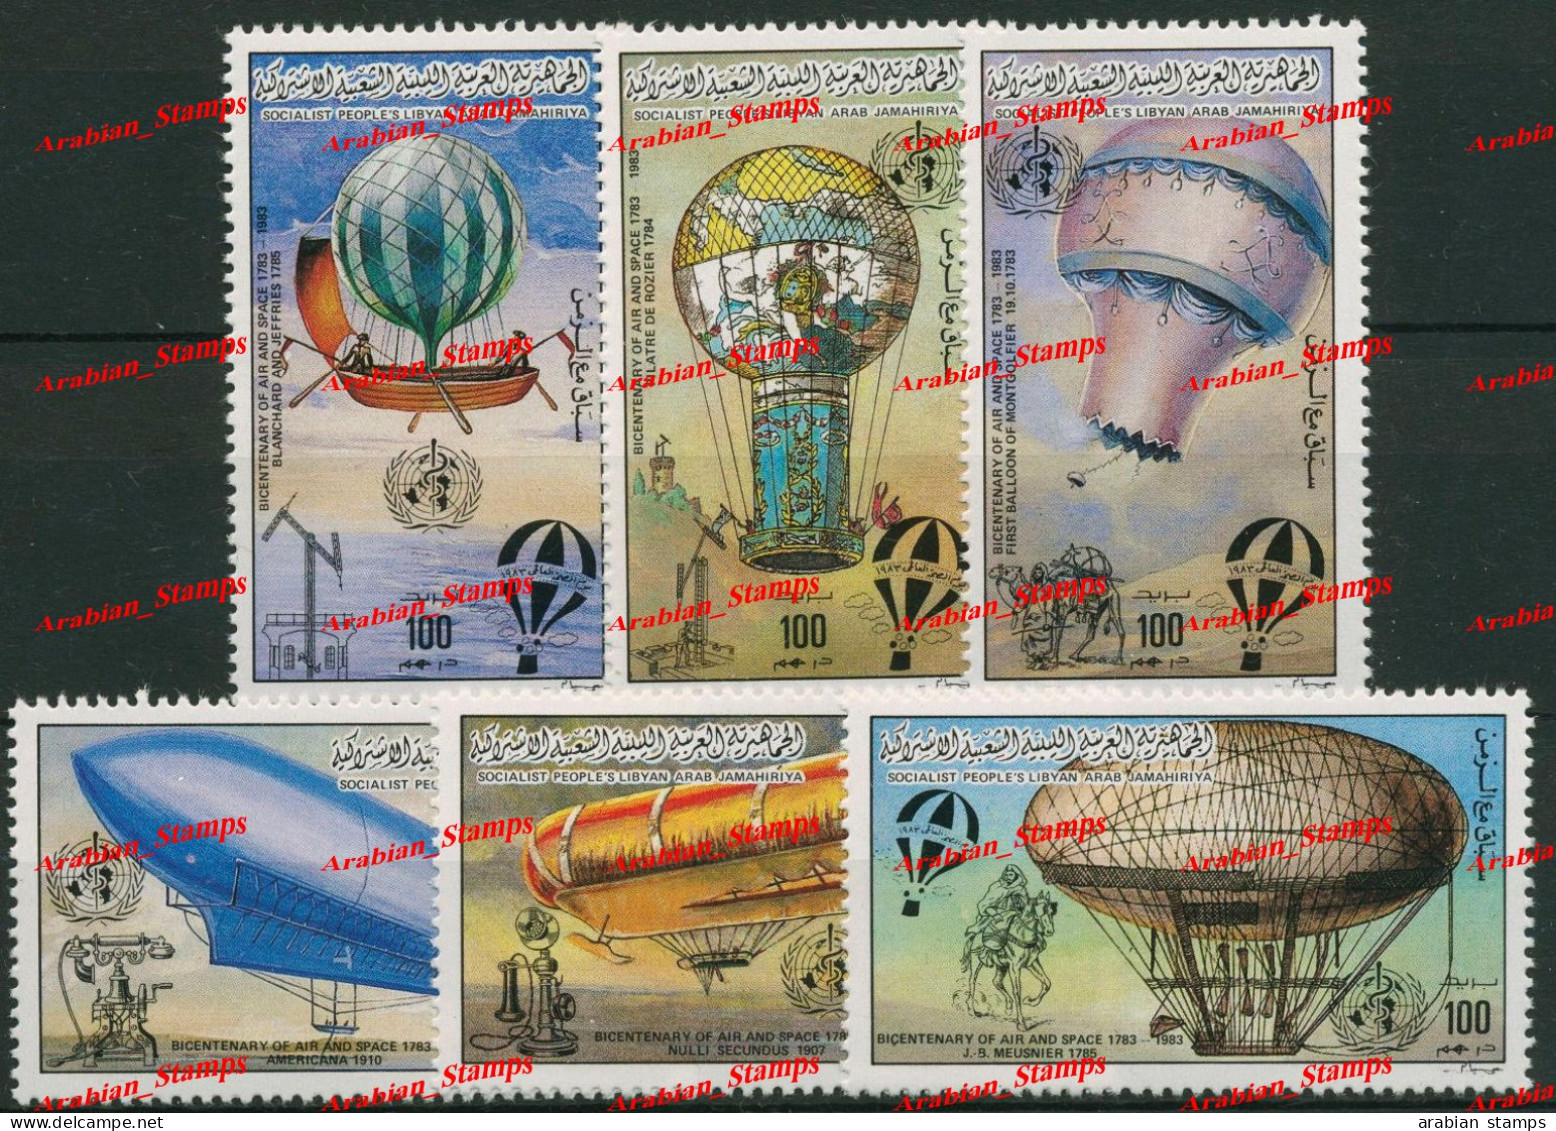 LIBYA 1983 MNH AIR AND SPACE BICENTENARY 1ST MANNED FLIGHT 200TH ZEPPELIN  AIR BALLOON AEROSTAT JOINT ISSUE - Libye